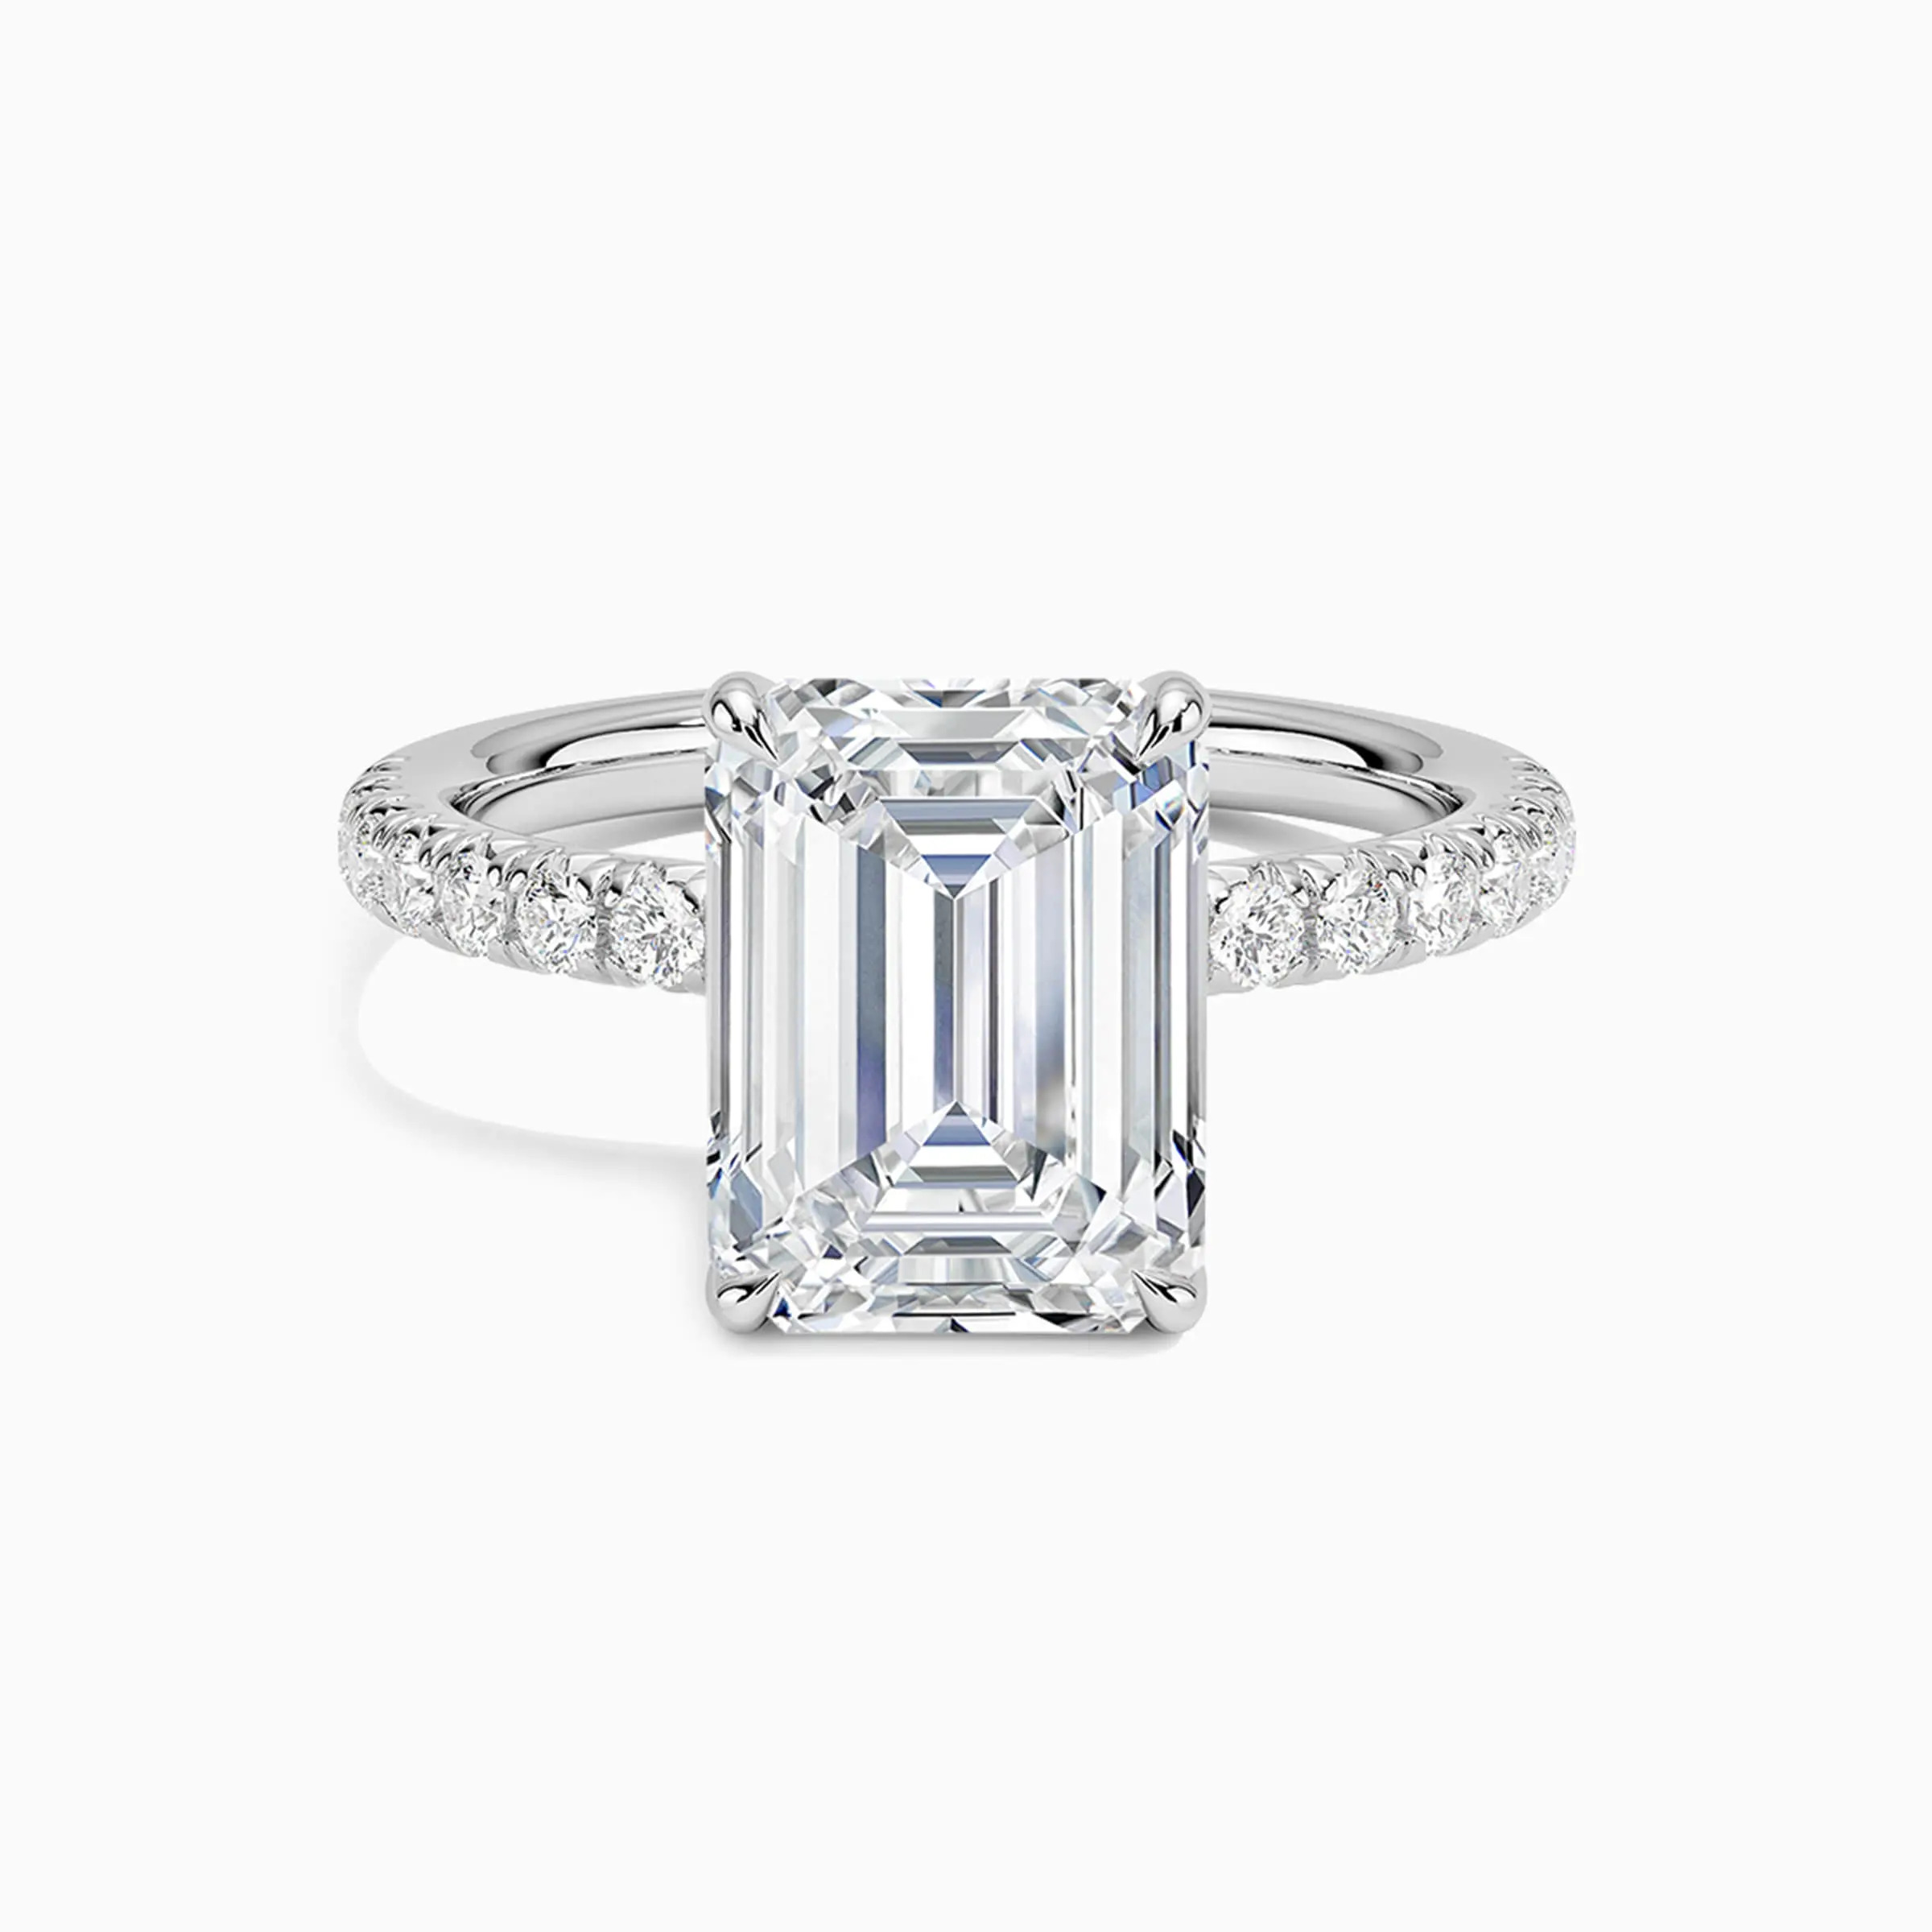 darry ring white gold promise ring